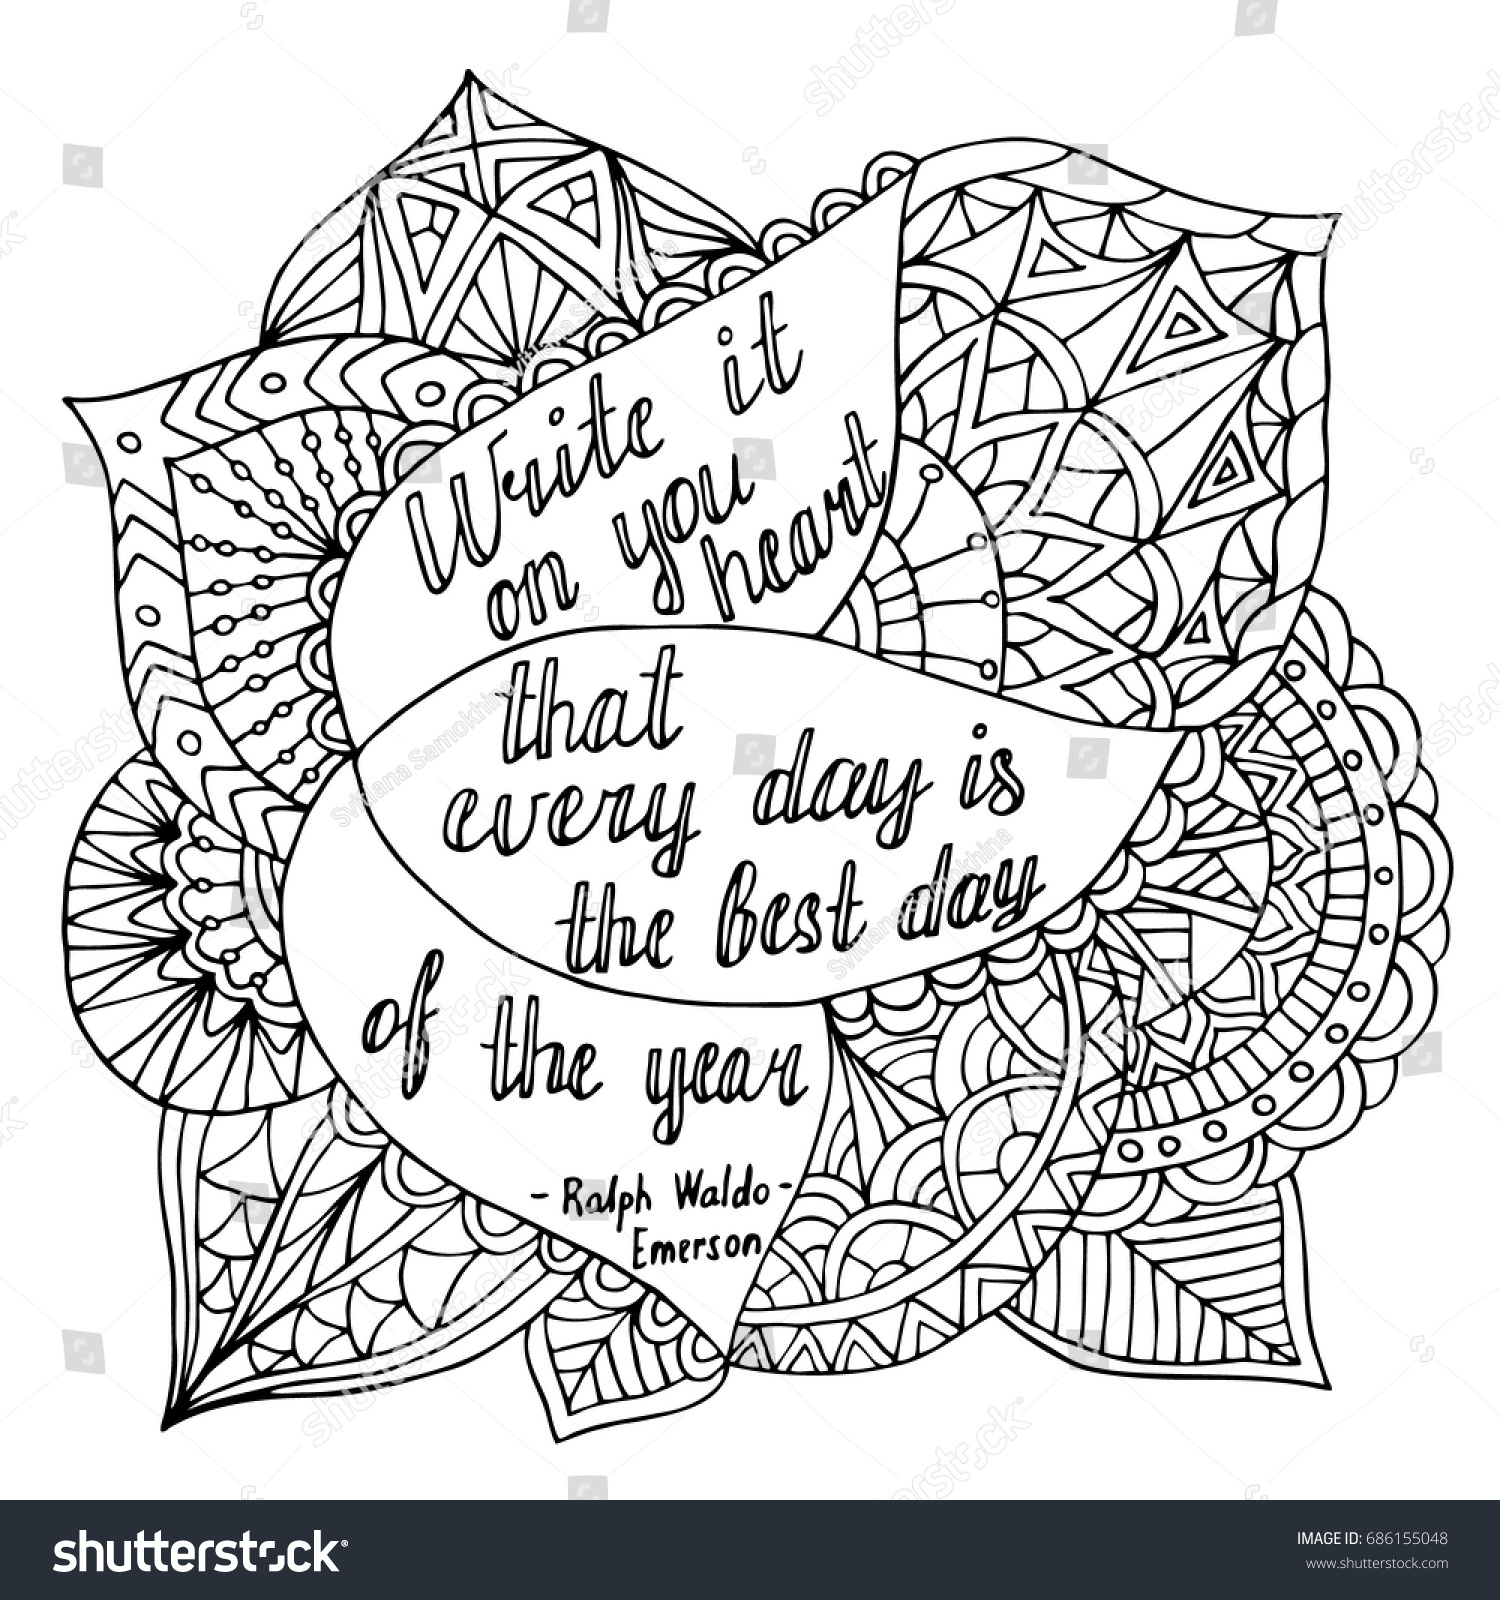 Coloring page with motivational quote Coloring for adult Anti stress Coloring Page with high